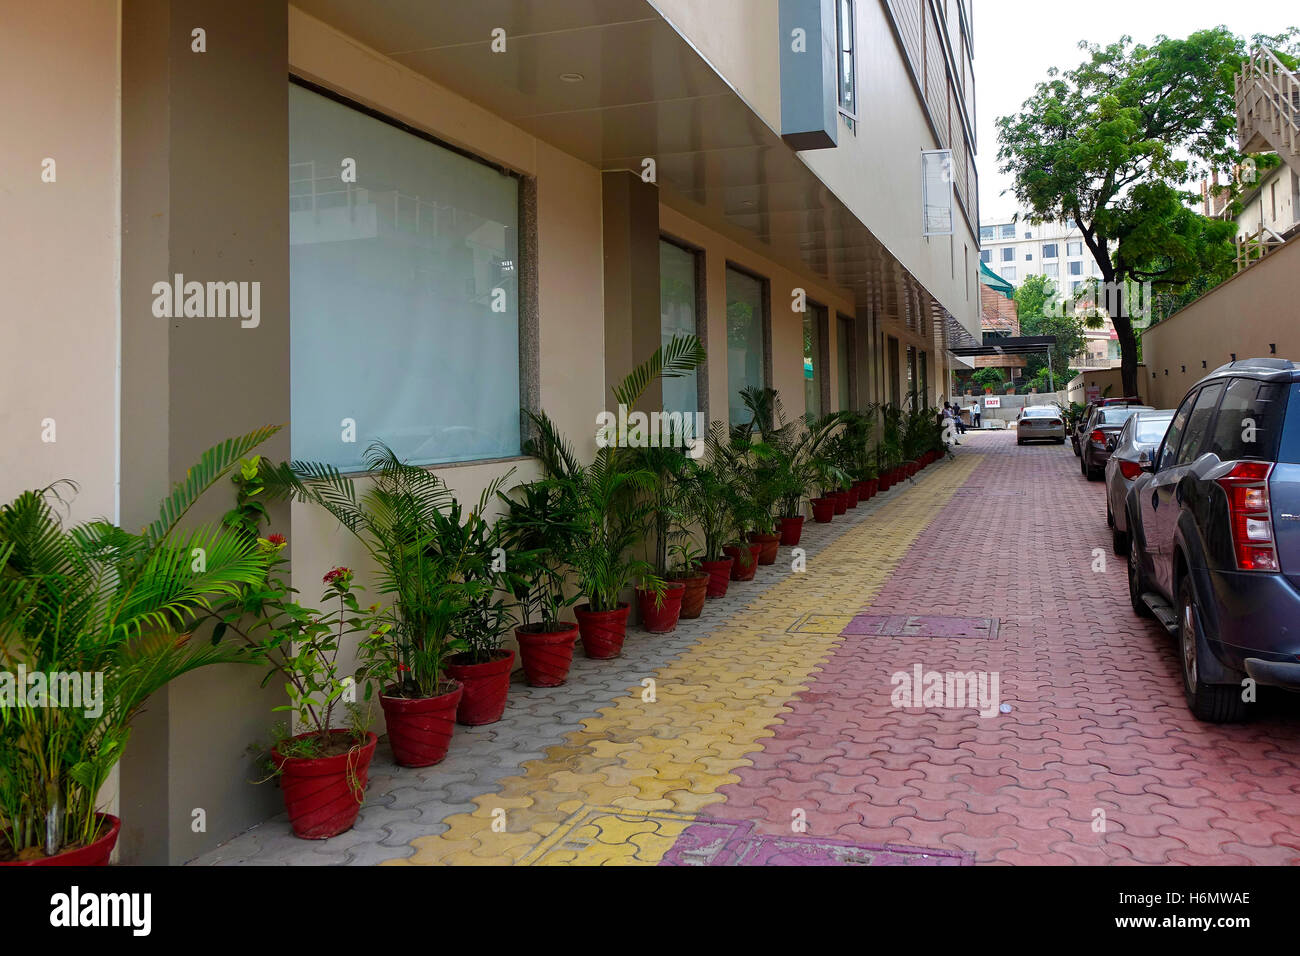 prespactive view of  Hotel corridor and parking in which plant pots arranged in row for decoration Stock Photo